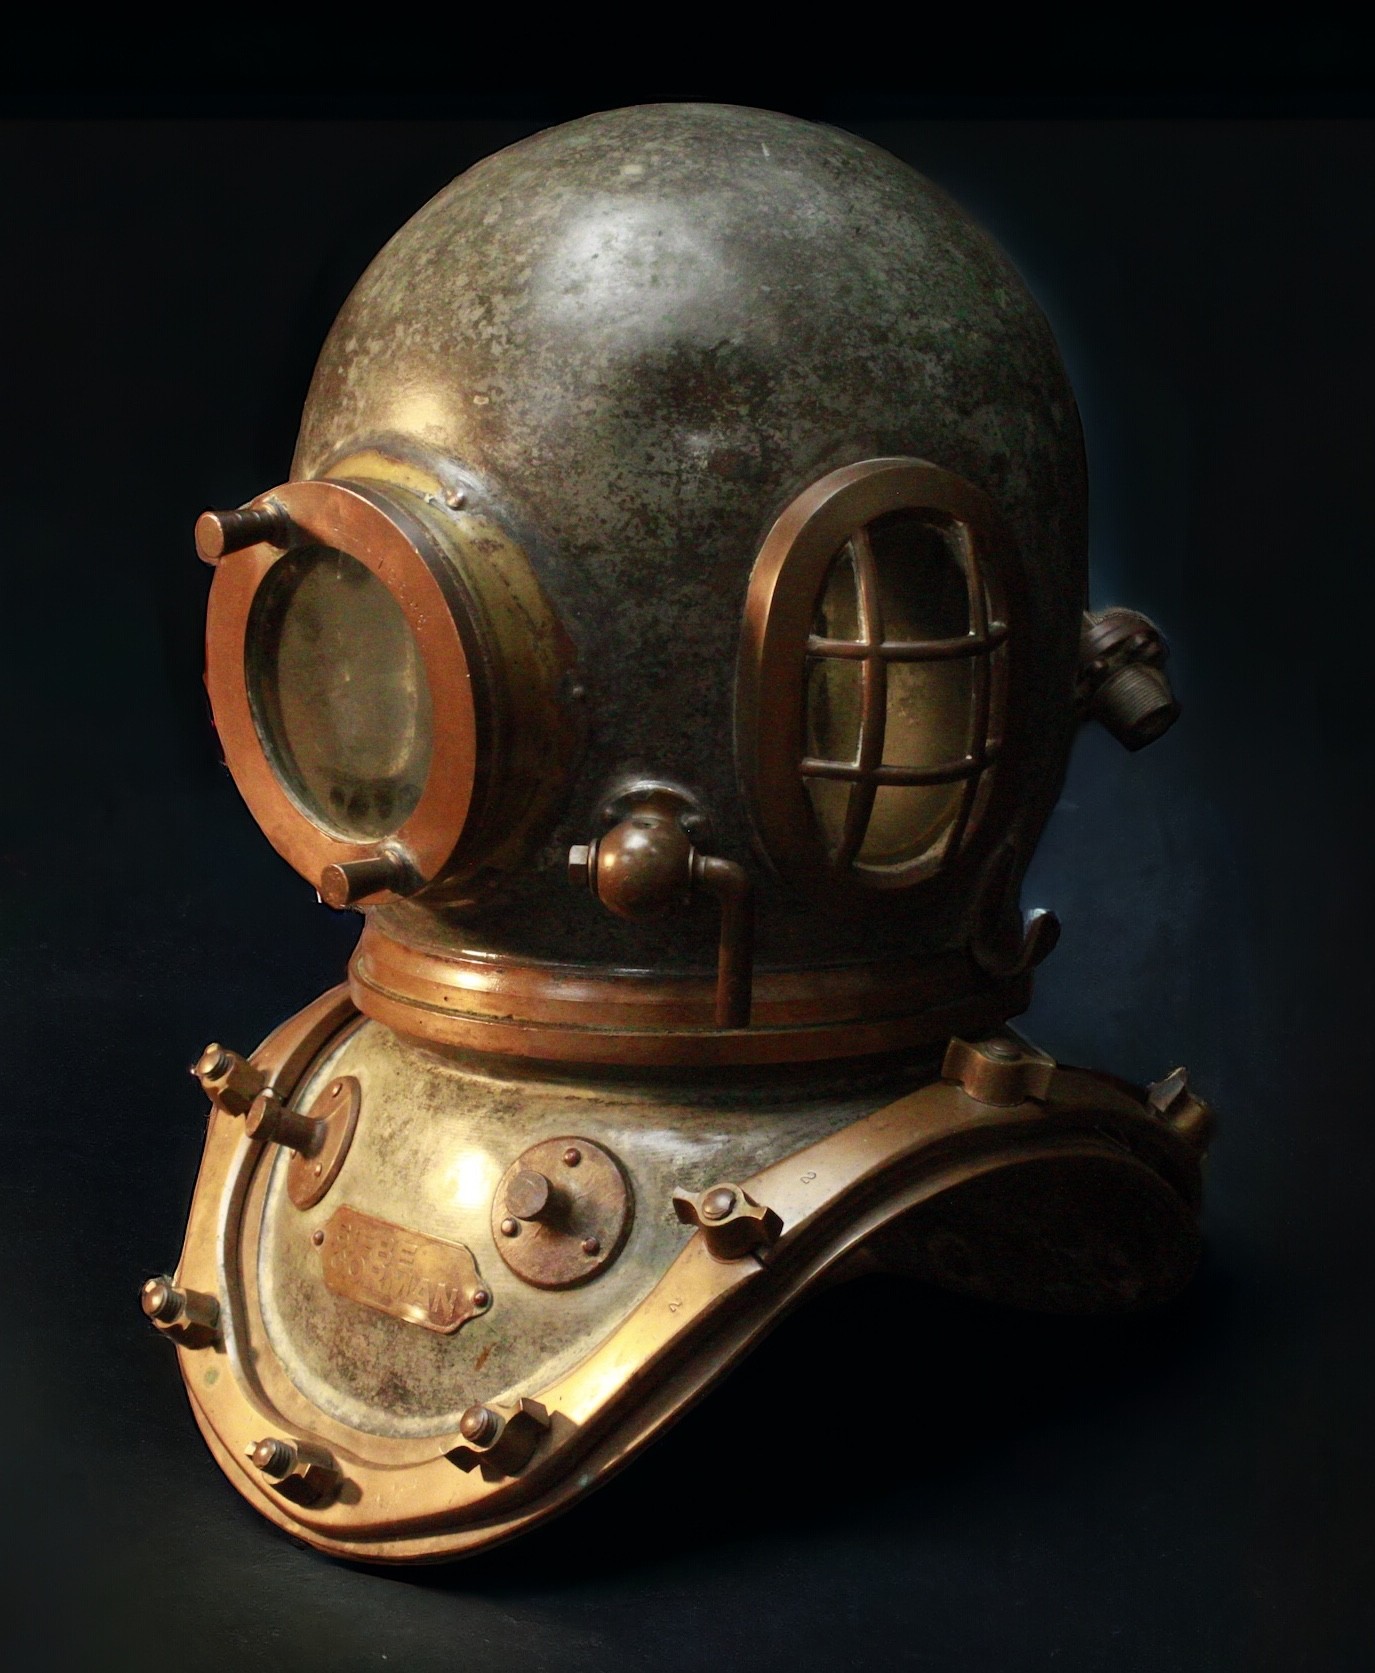 A FINE 12-BOLT DIVING HELMET BY SIEBE GORMAN, CIRCA 1950 numbered 19685 (matching on faceplate and - Image 2 of 7